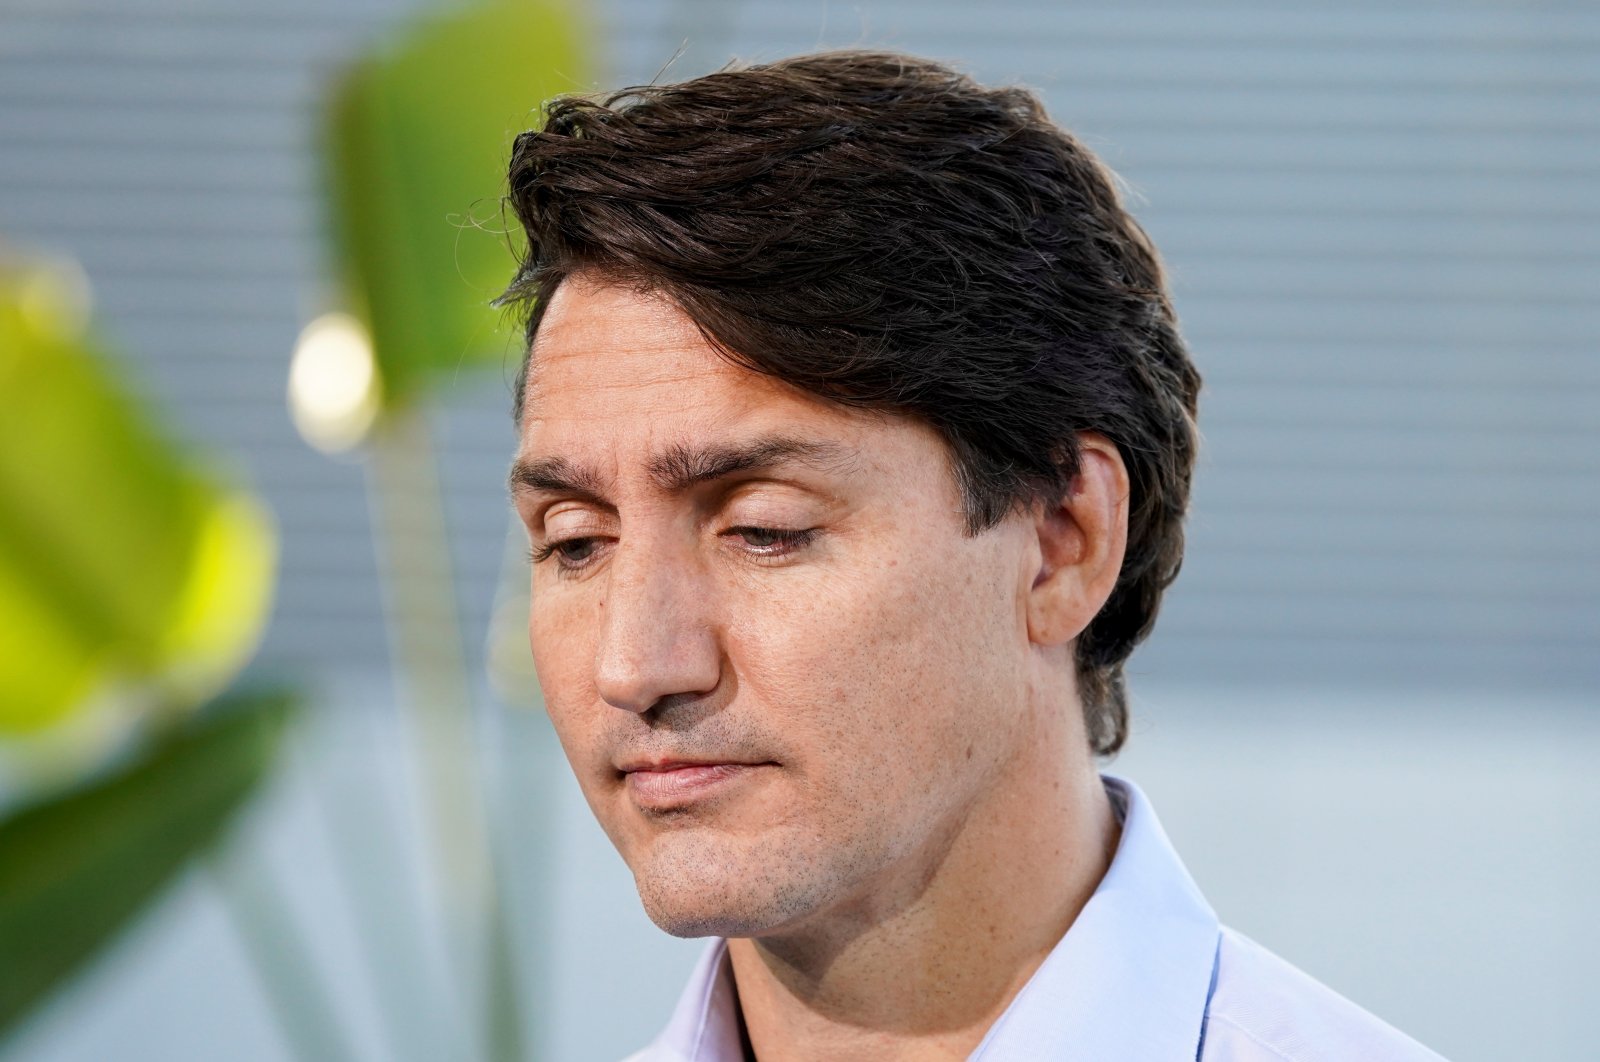 Canada's Liberal Prime Minister Justin Trudeau looks on during an election campaign stop in Windsor, Ontario, Canada, Sept. 17, 2021. (Reuters Photo)